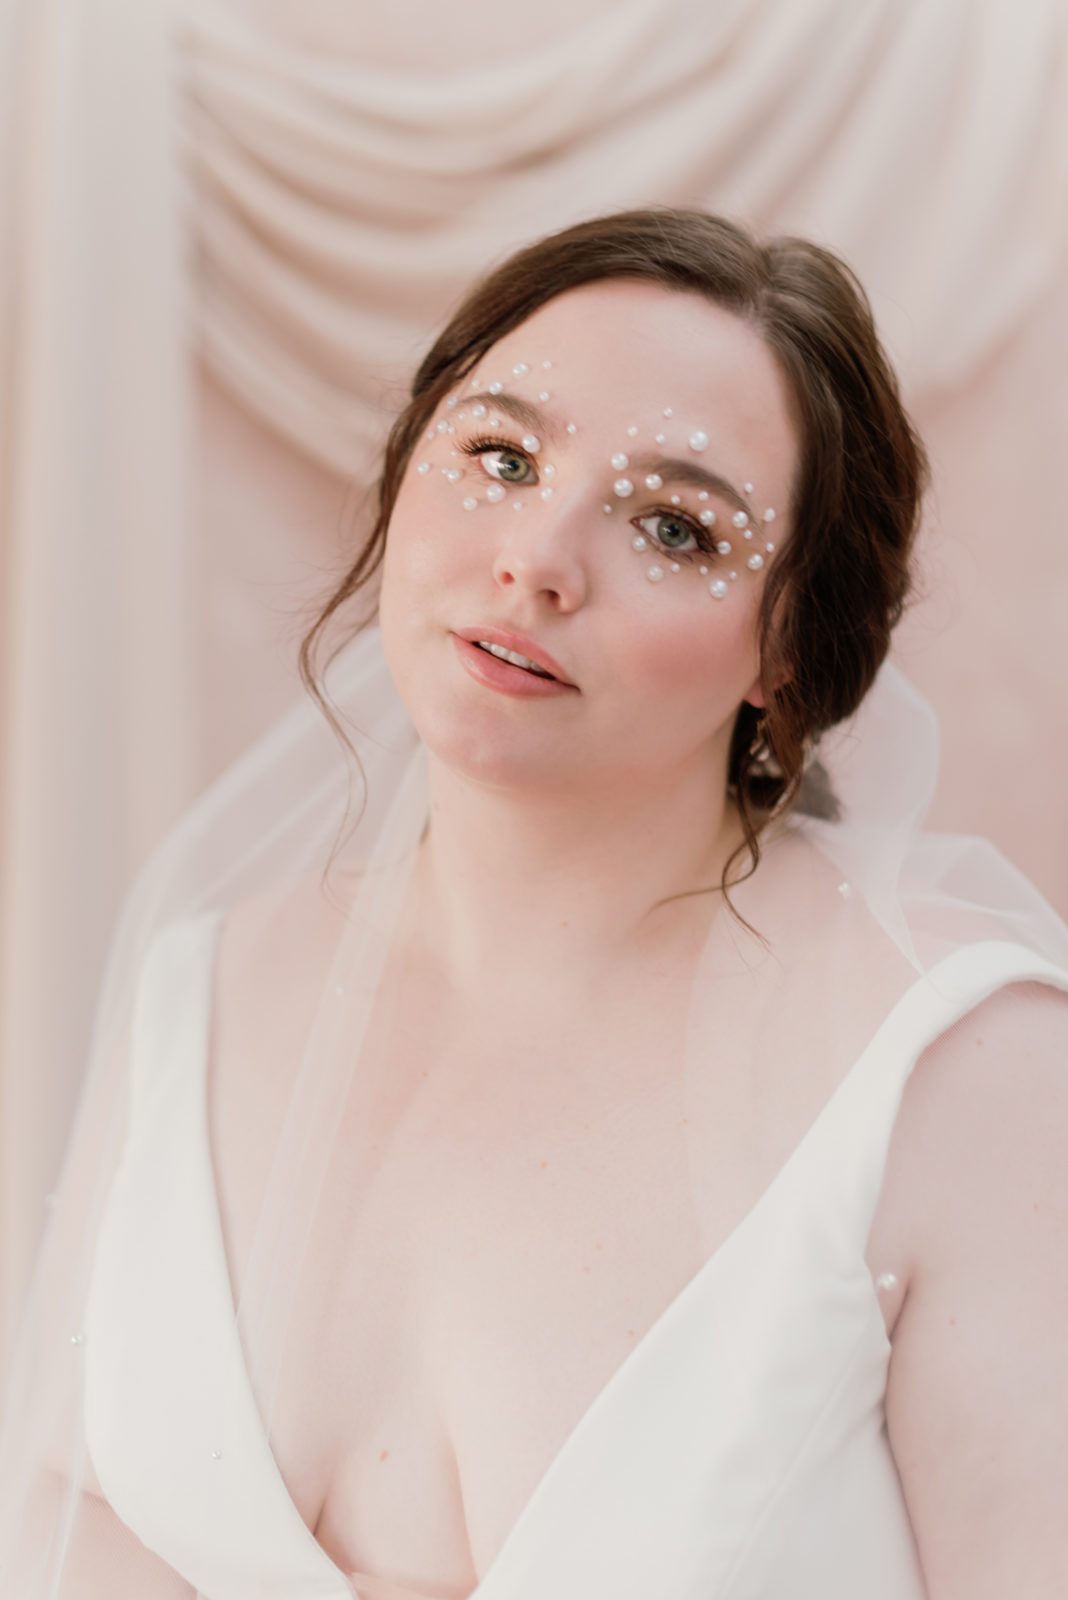 Model with pearls for eye makeup poses in the selcouth wedding dress by Aesling